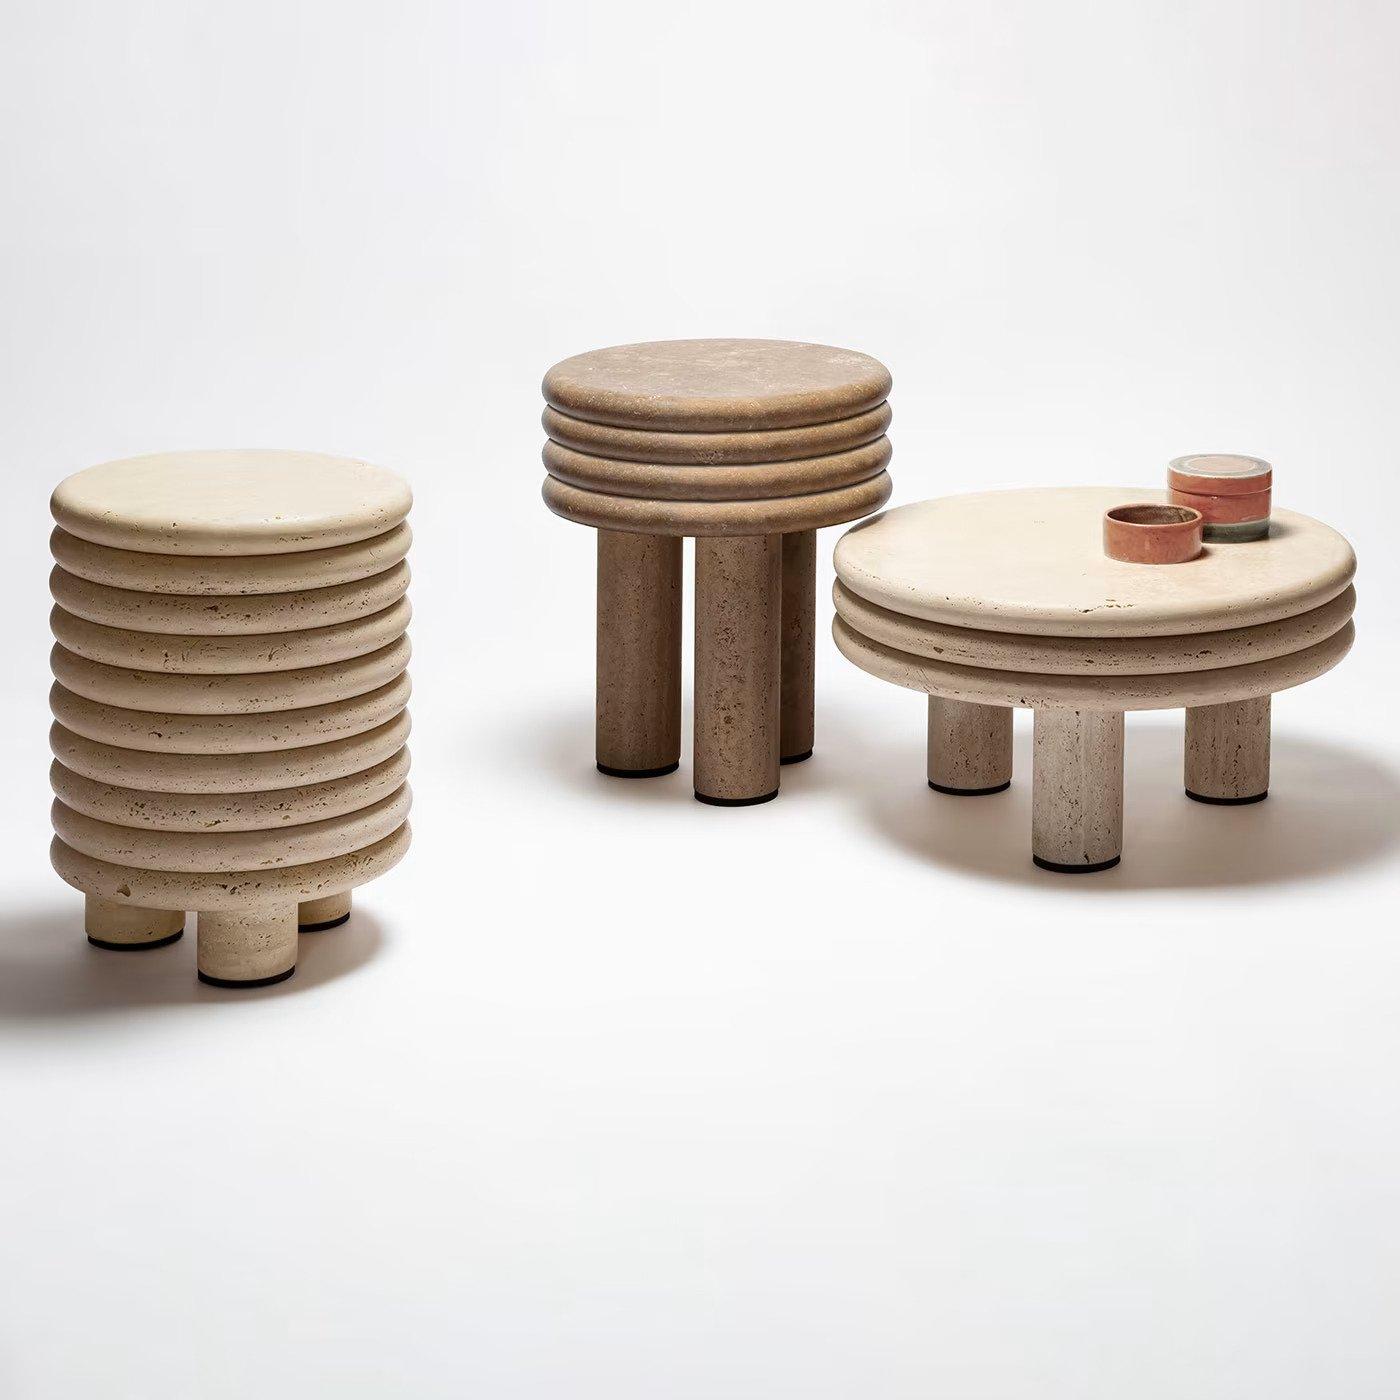 Contemporary round large coffee table stool - Scala by Stephane Parmentier for Giobagnara.

The iconic form of the celebrated scala stool and coffee tables, winners of the Wallpaper Design Award, is now translated in stone. The ribbed shape is